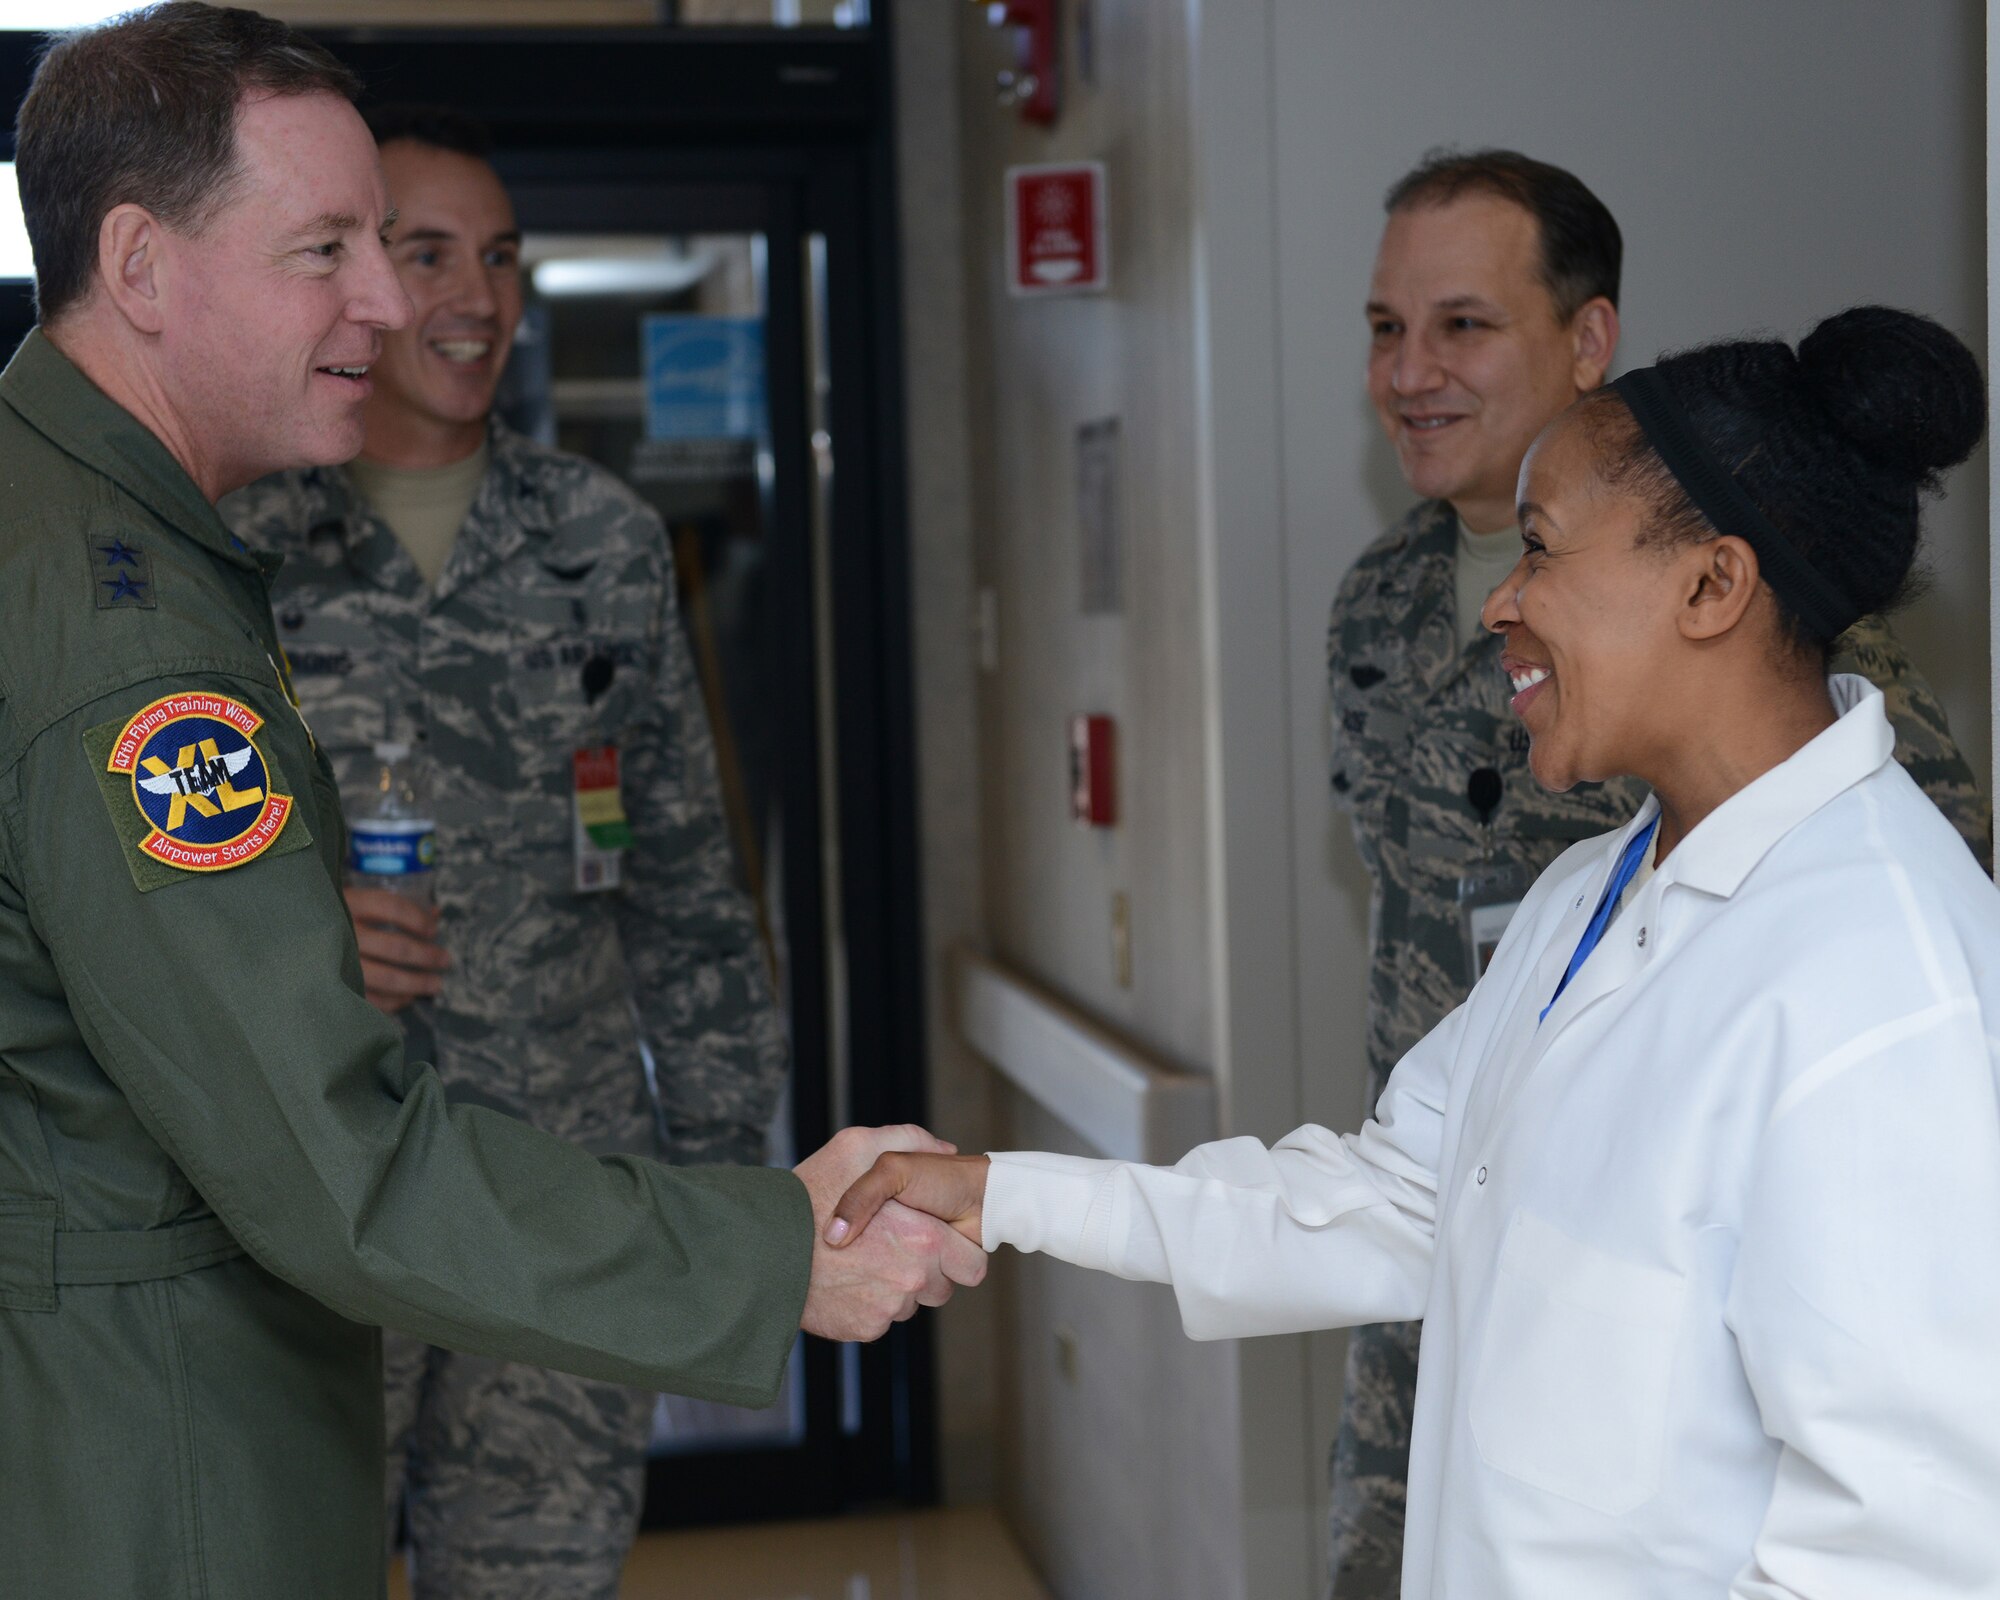 Maj. Gen. James Hecker, 19th Air Force commander, meets with Staff Sgt. Halima Burton, 47th Medical Operations Support Squadron dental hygienist, at Laughlin Air Force Base, Texas, Dec. 4, 2015. During his visit to Laughlin, Hecker toured the medical facility and spoke with personnel about programs and procedures they use. (U.S. Air Force photo by Senior Airman Jimmie D. Pike)